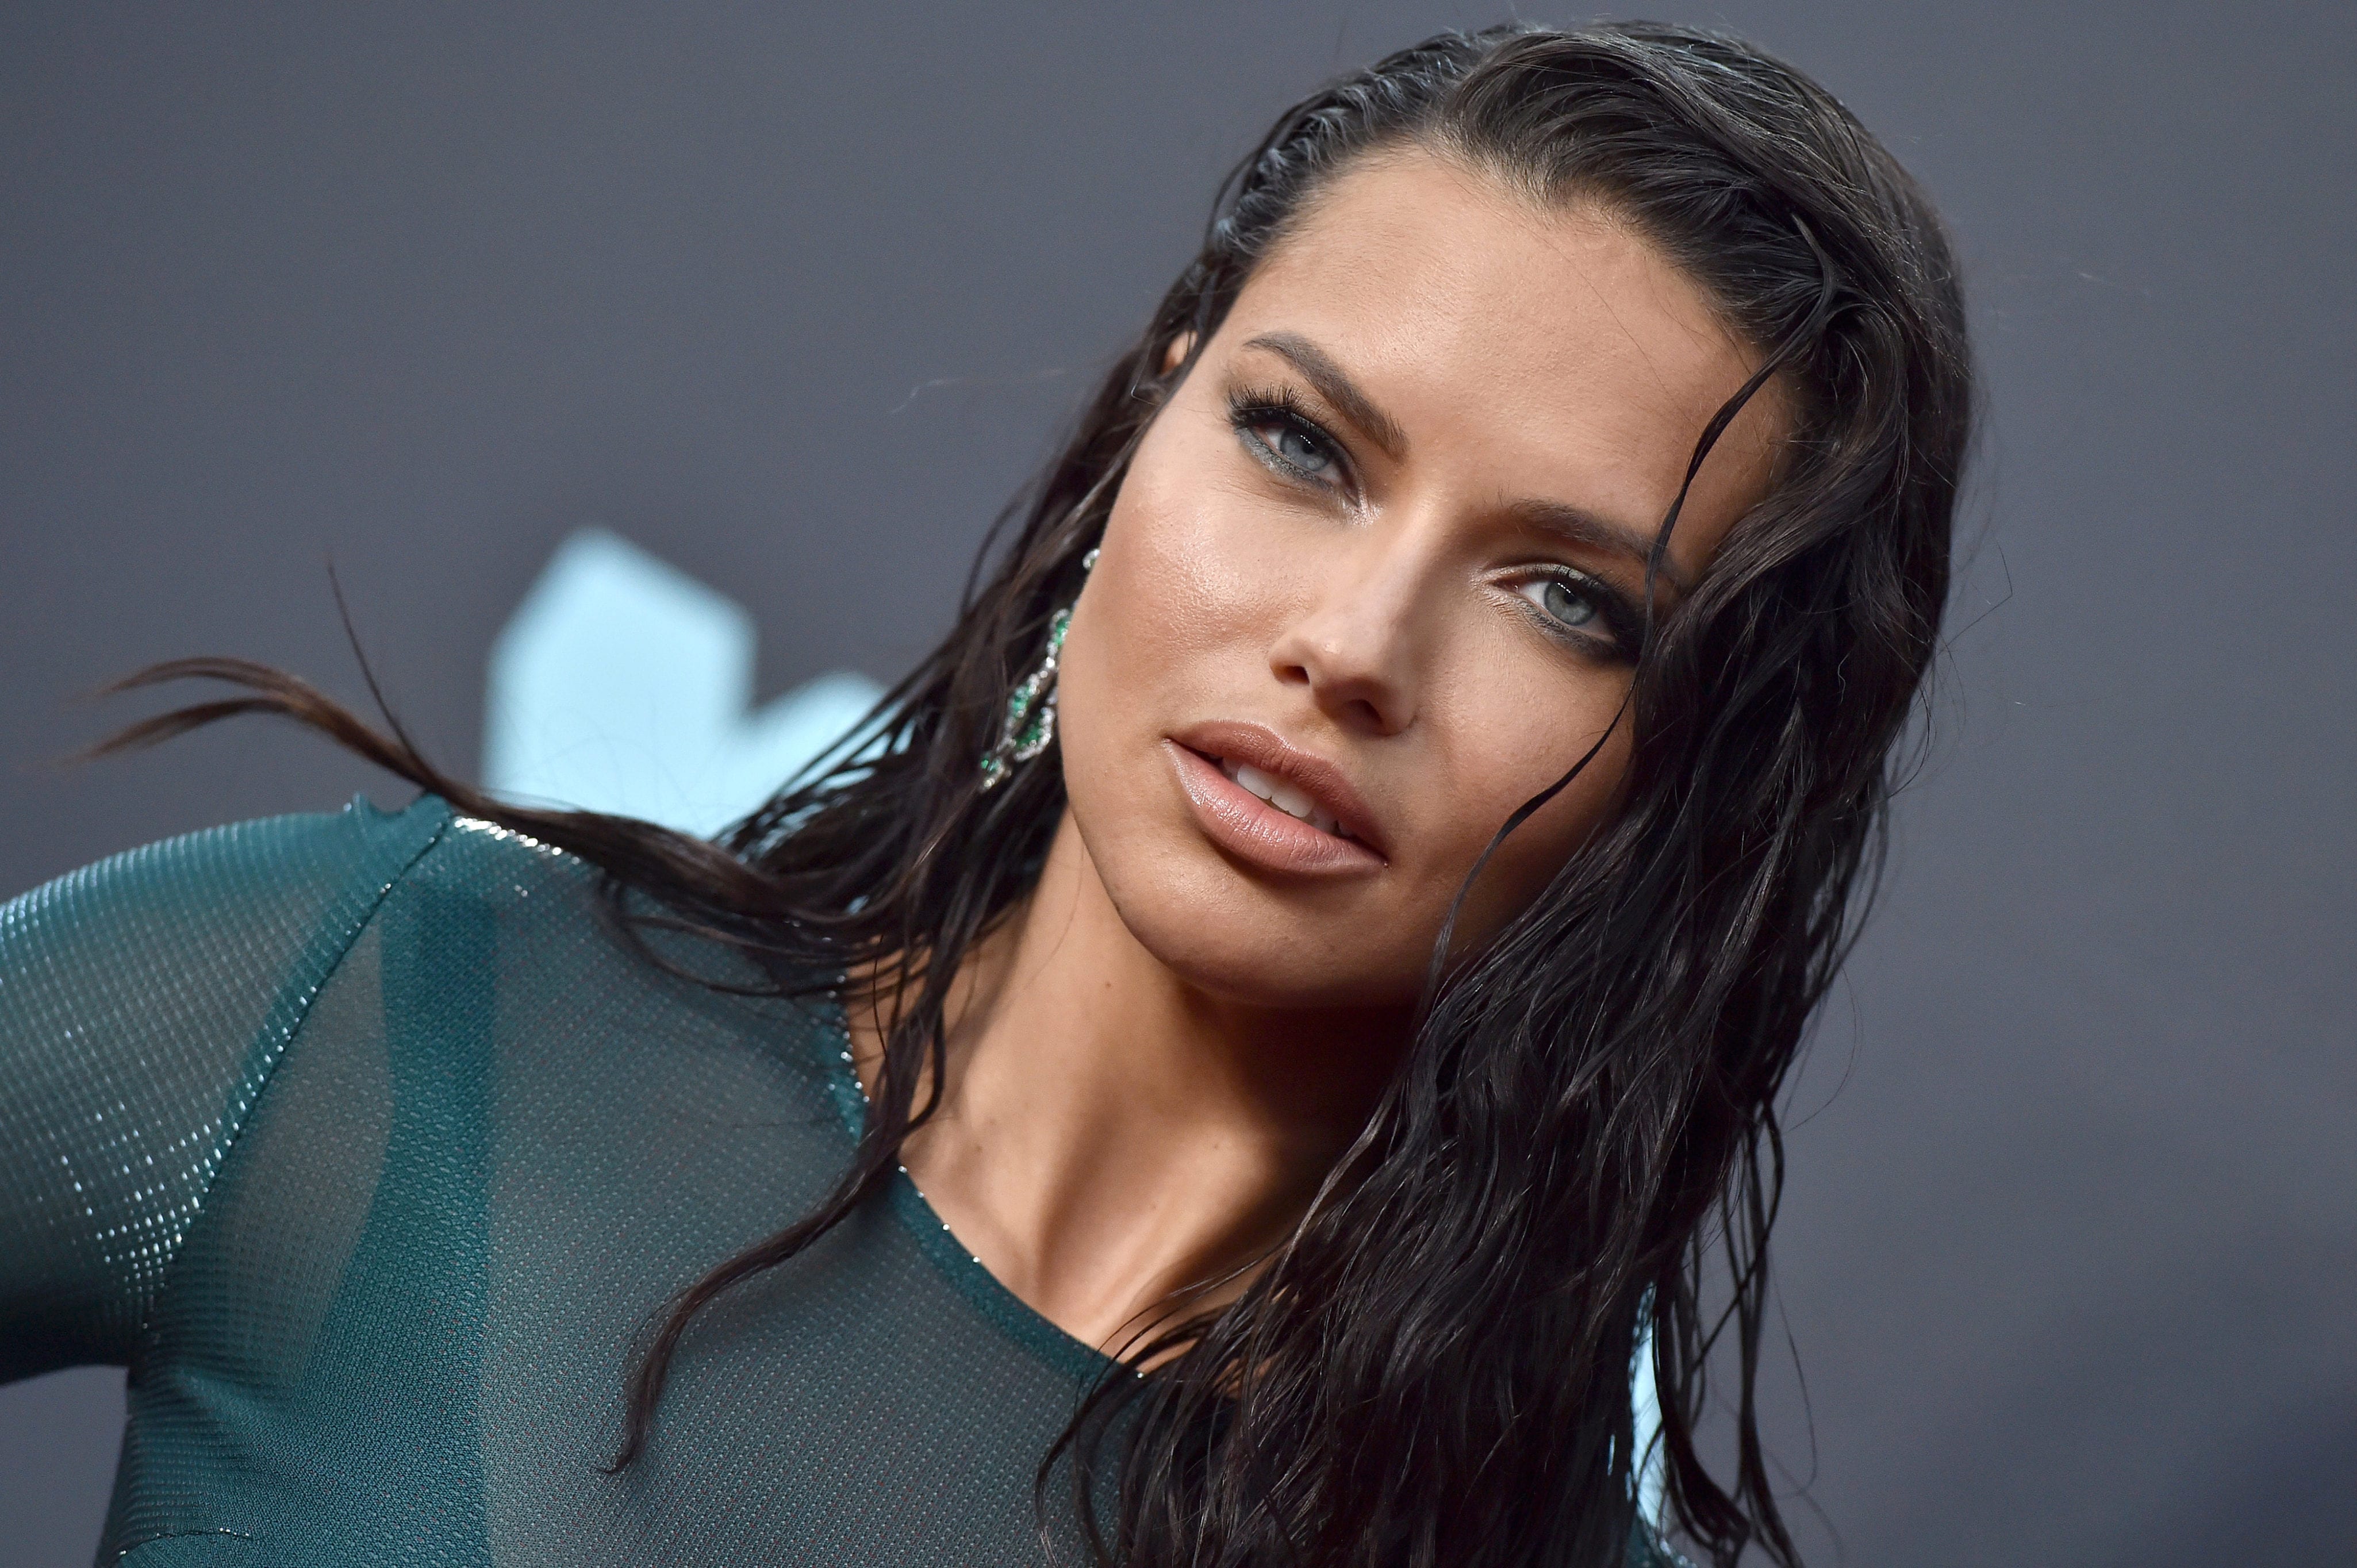 The Importance of SelfAcceptance Adriana Lima's Message to Women